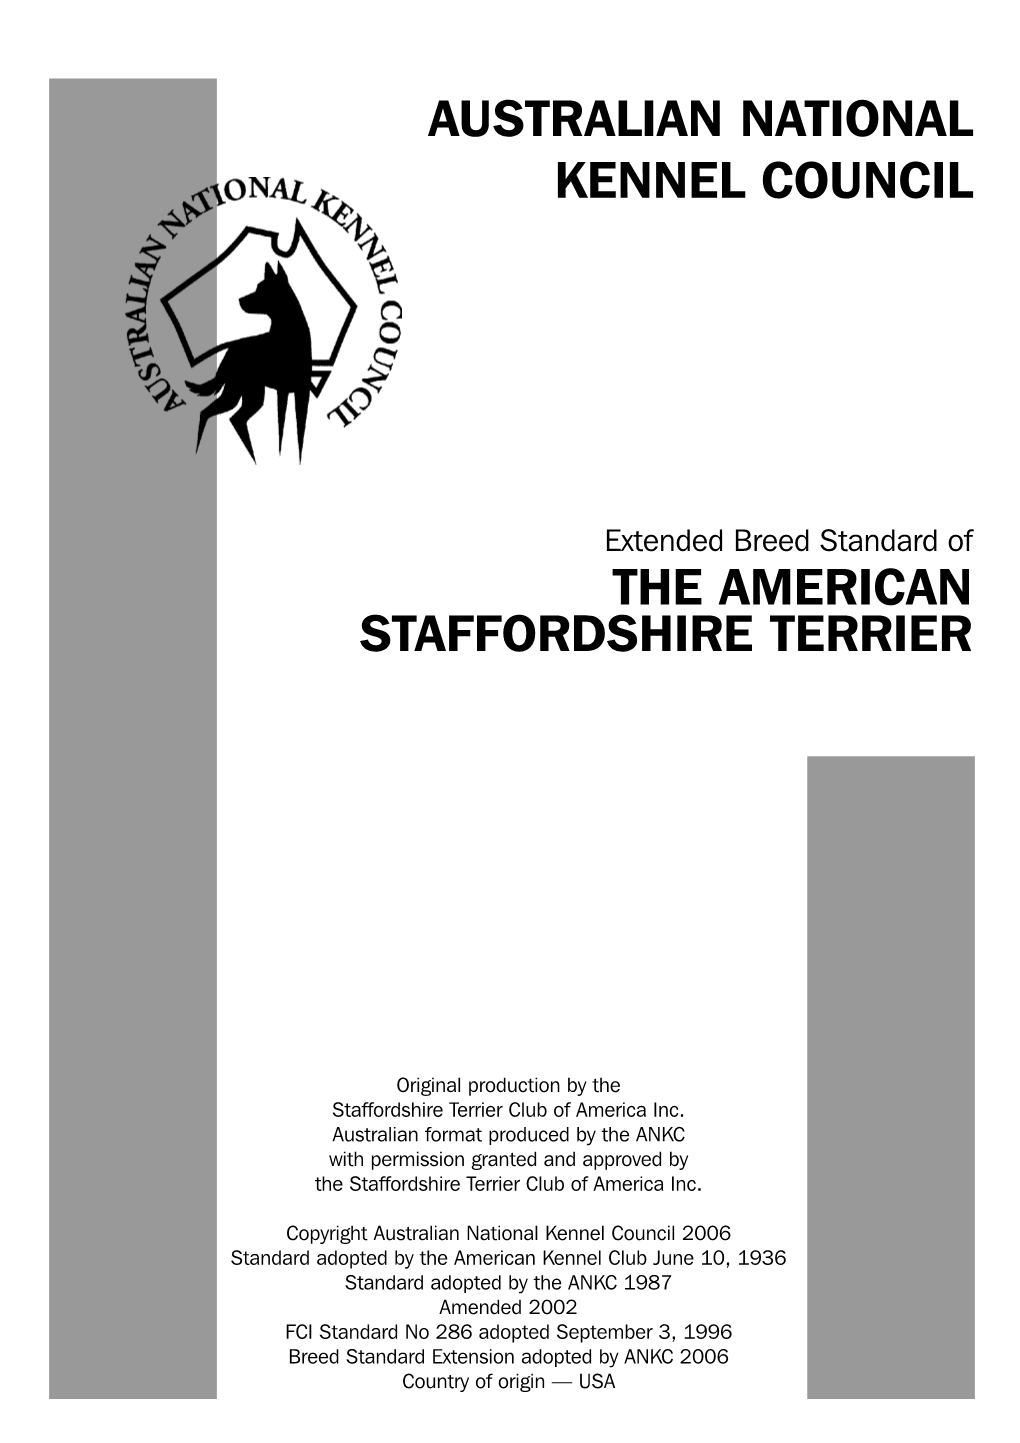 (Extended) Standard for American Staffordshire Terrier